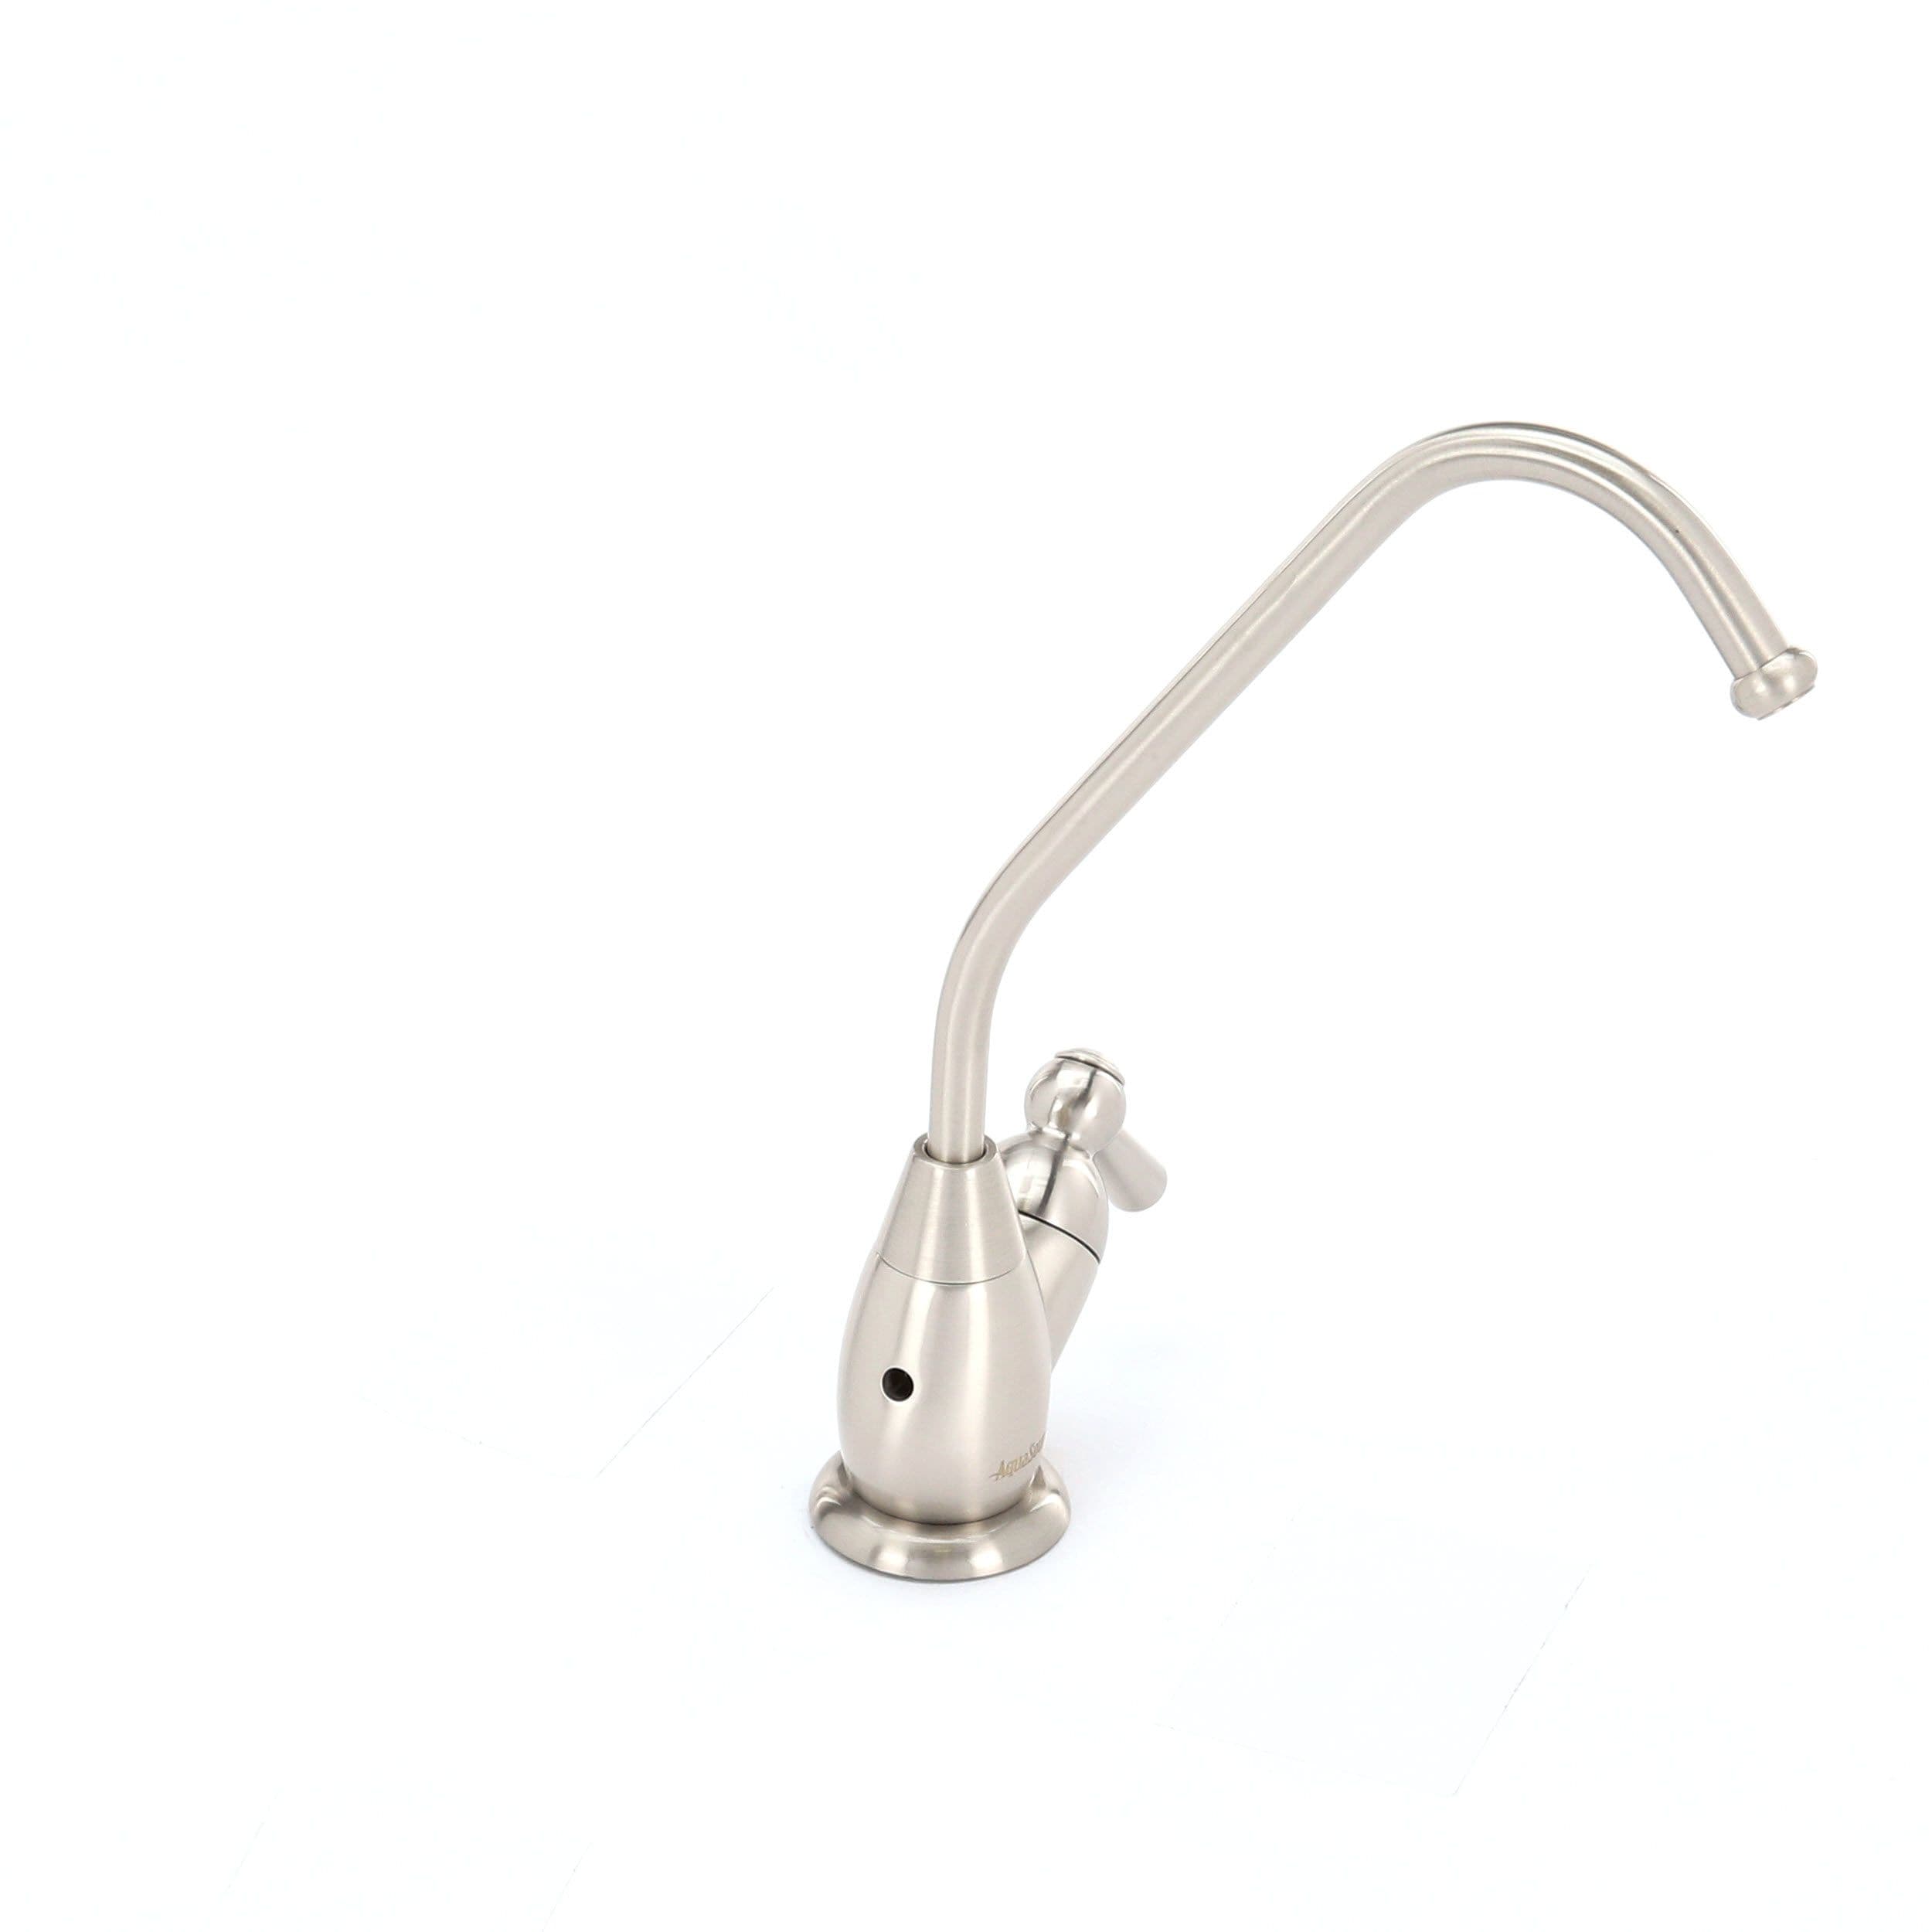 Cucina 9400-18-SN Acqua 1 Handle Cold Water Dispenser Faucet BRUSHED NICKEL PVD 